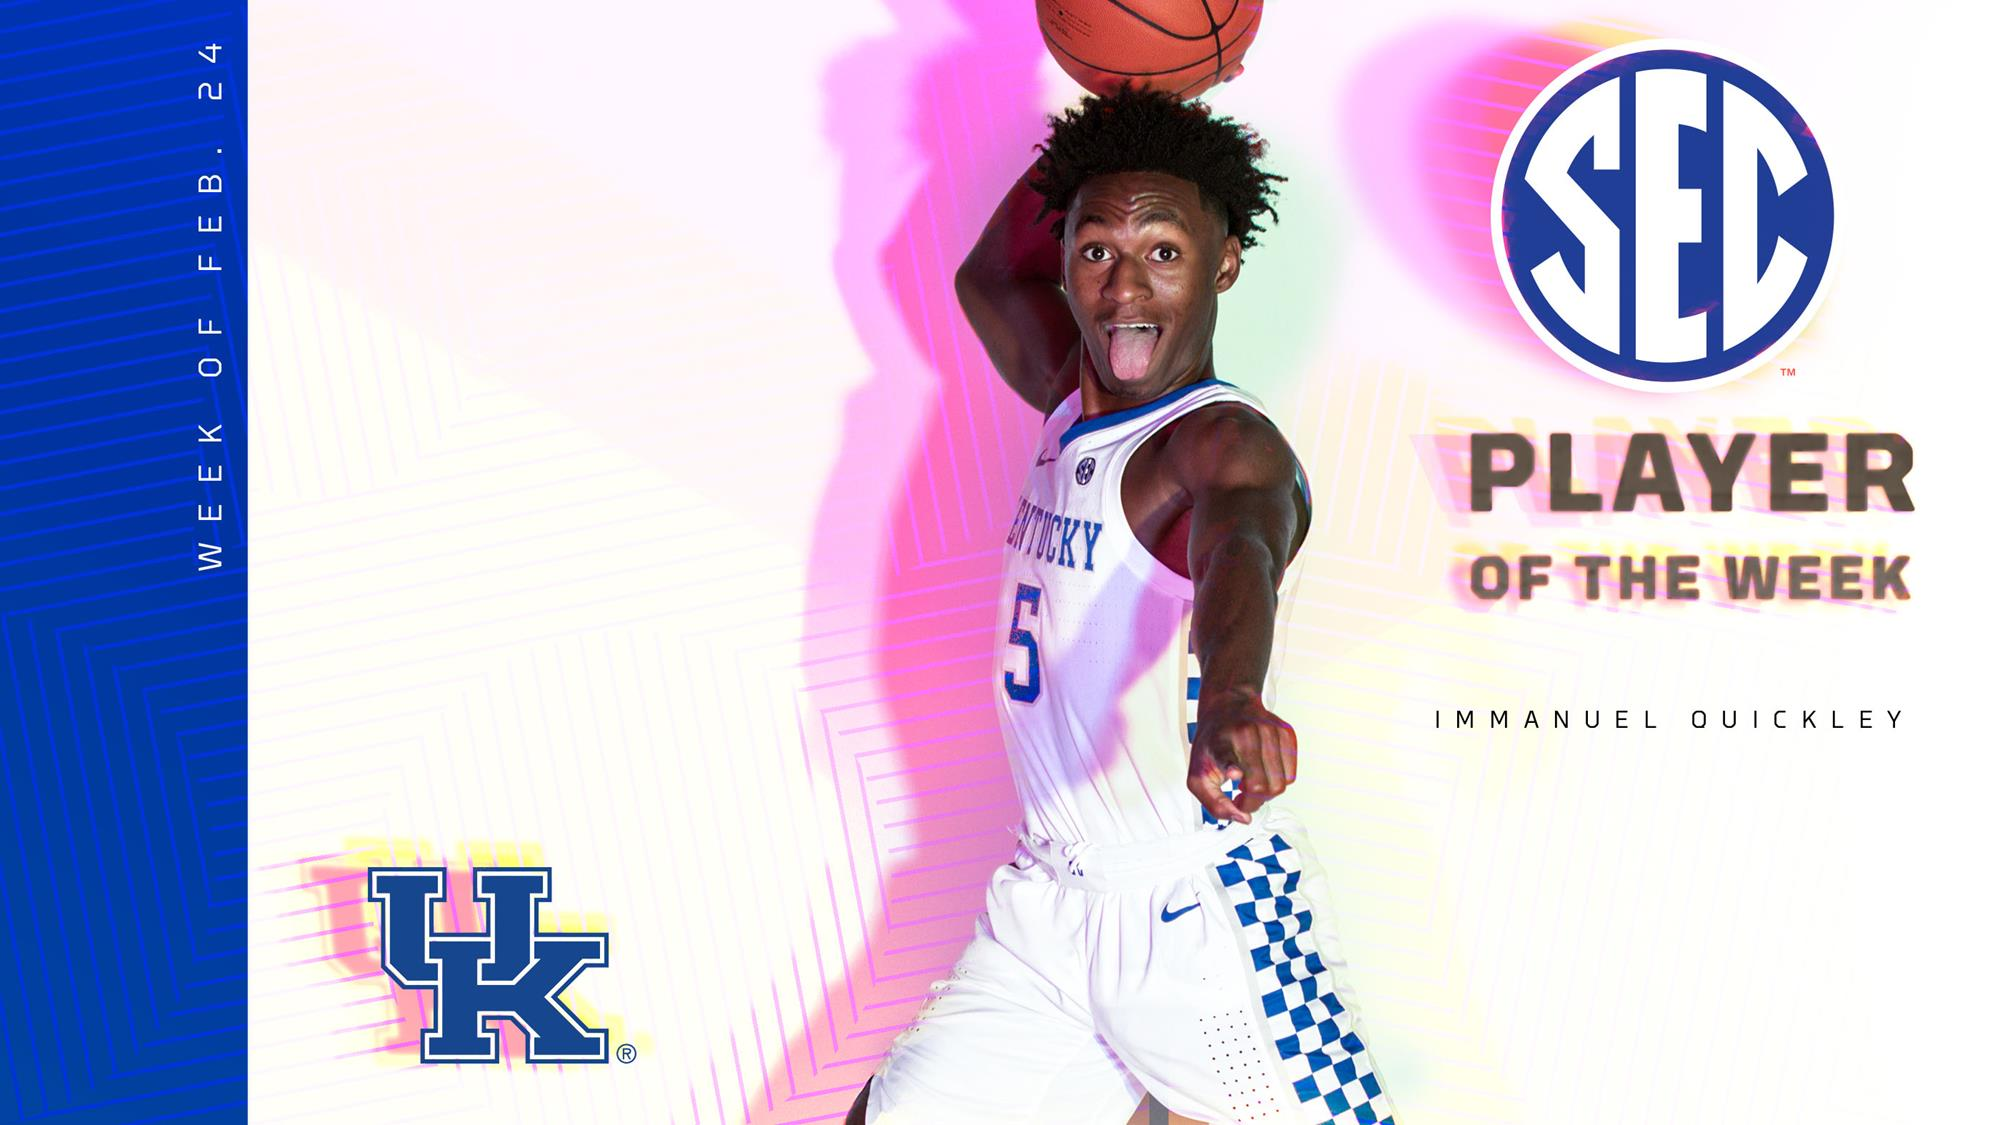 Immanuel Quickley Named SEC Player of the Week